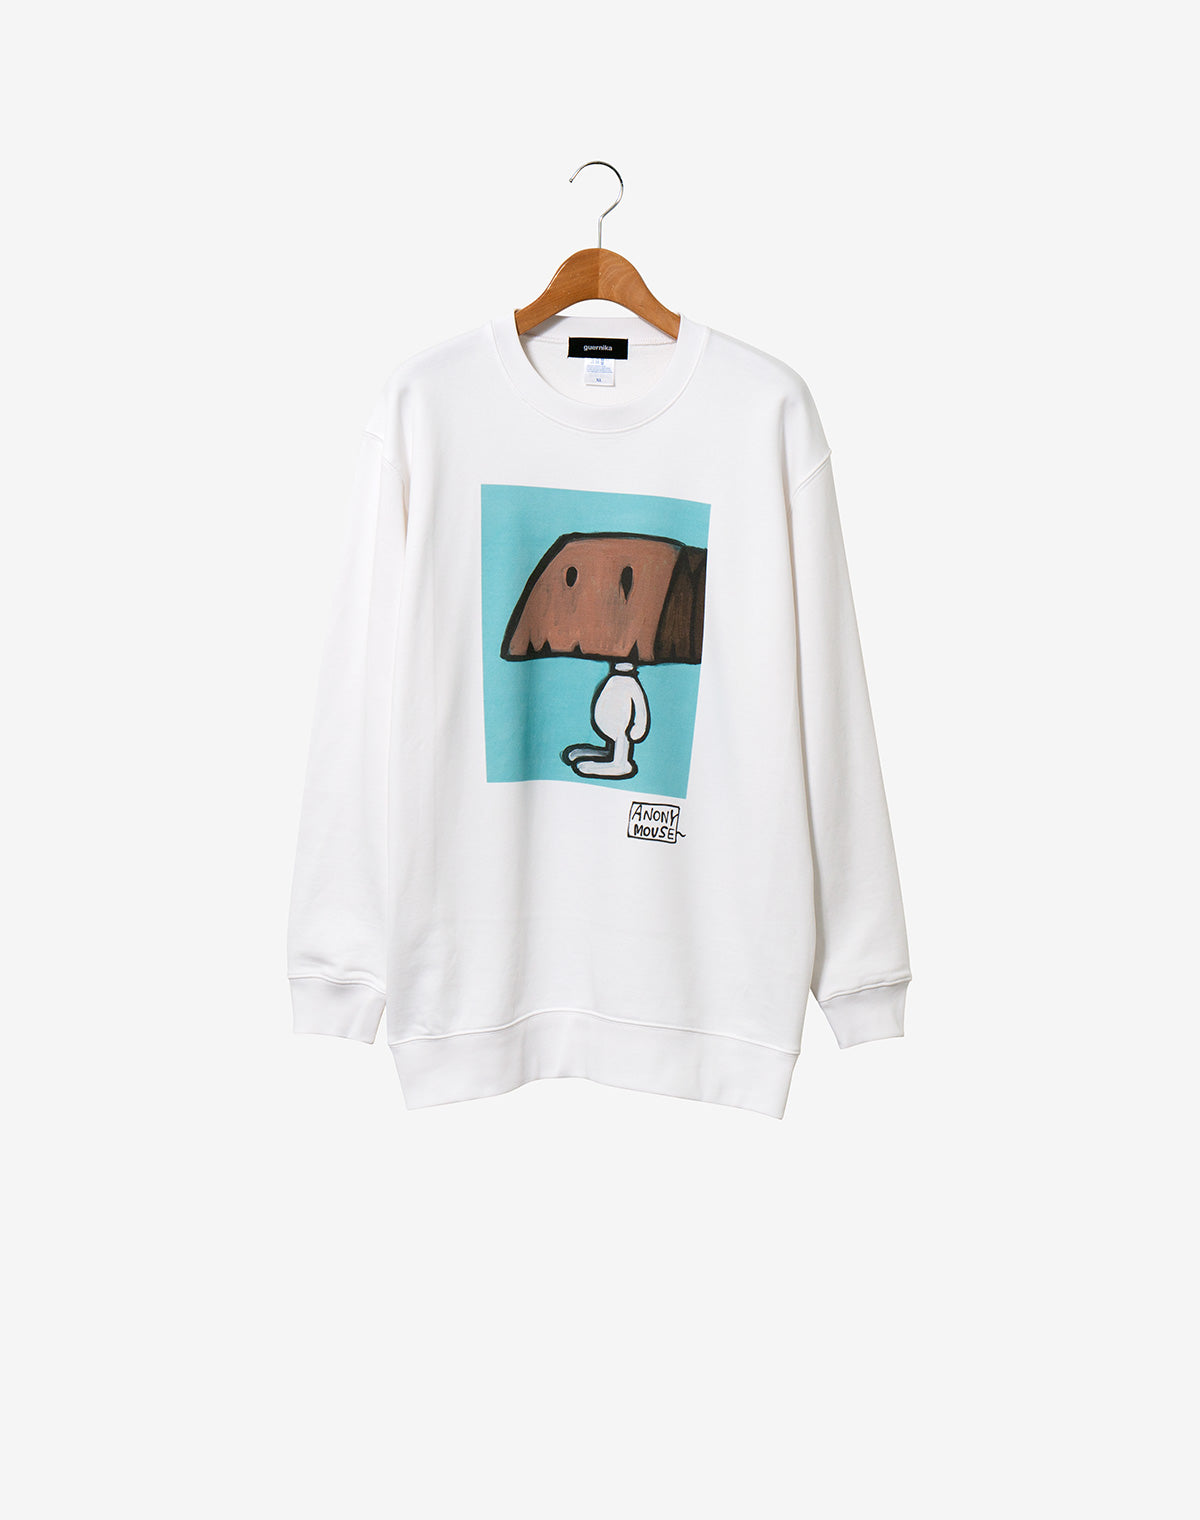 Print Sweat Shirt - ANONYMOUSE / White – guernika official online shop